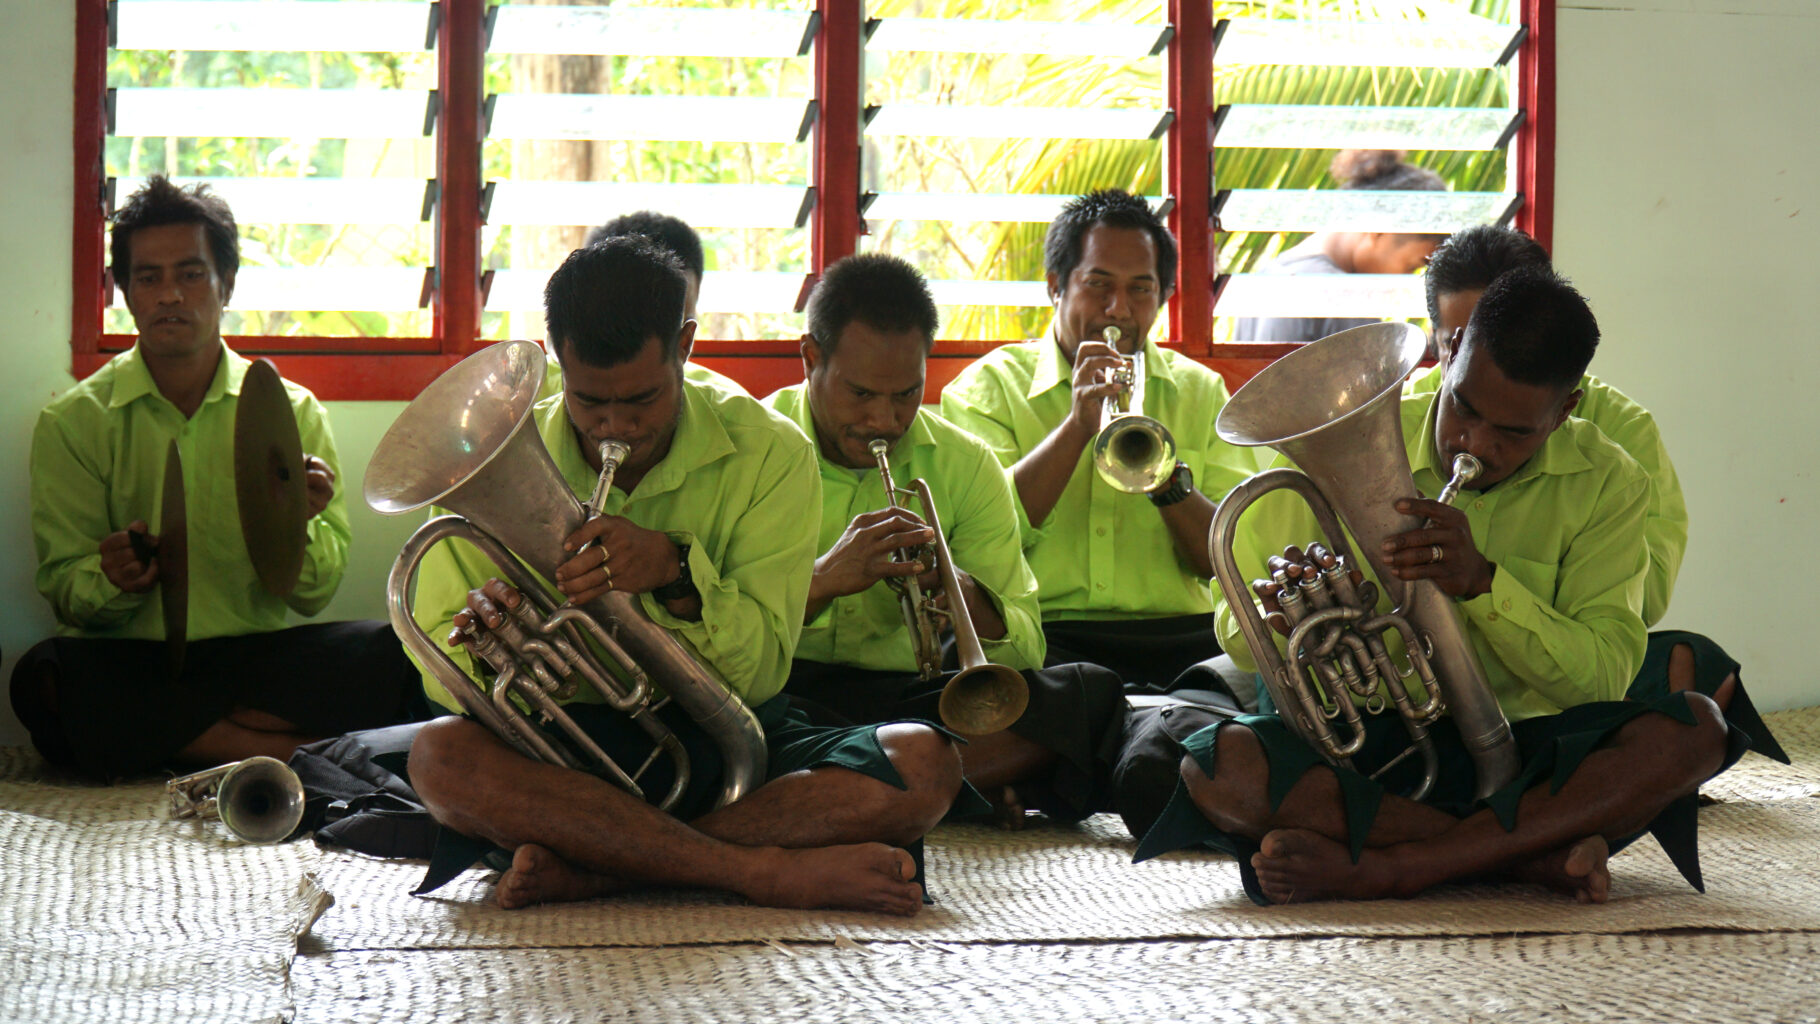 Fijian youth play in a brass band